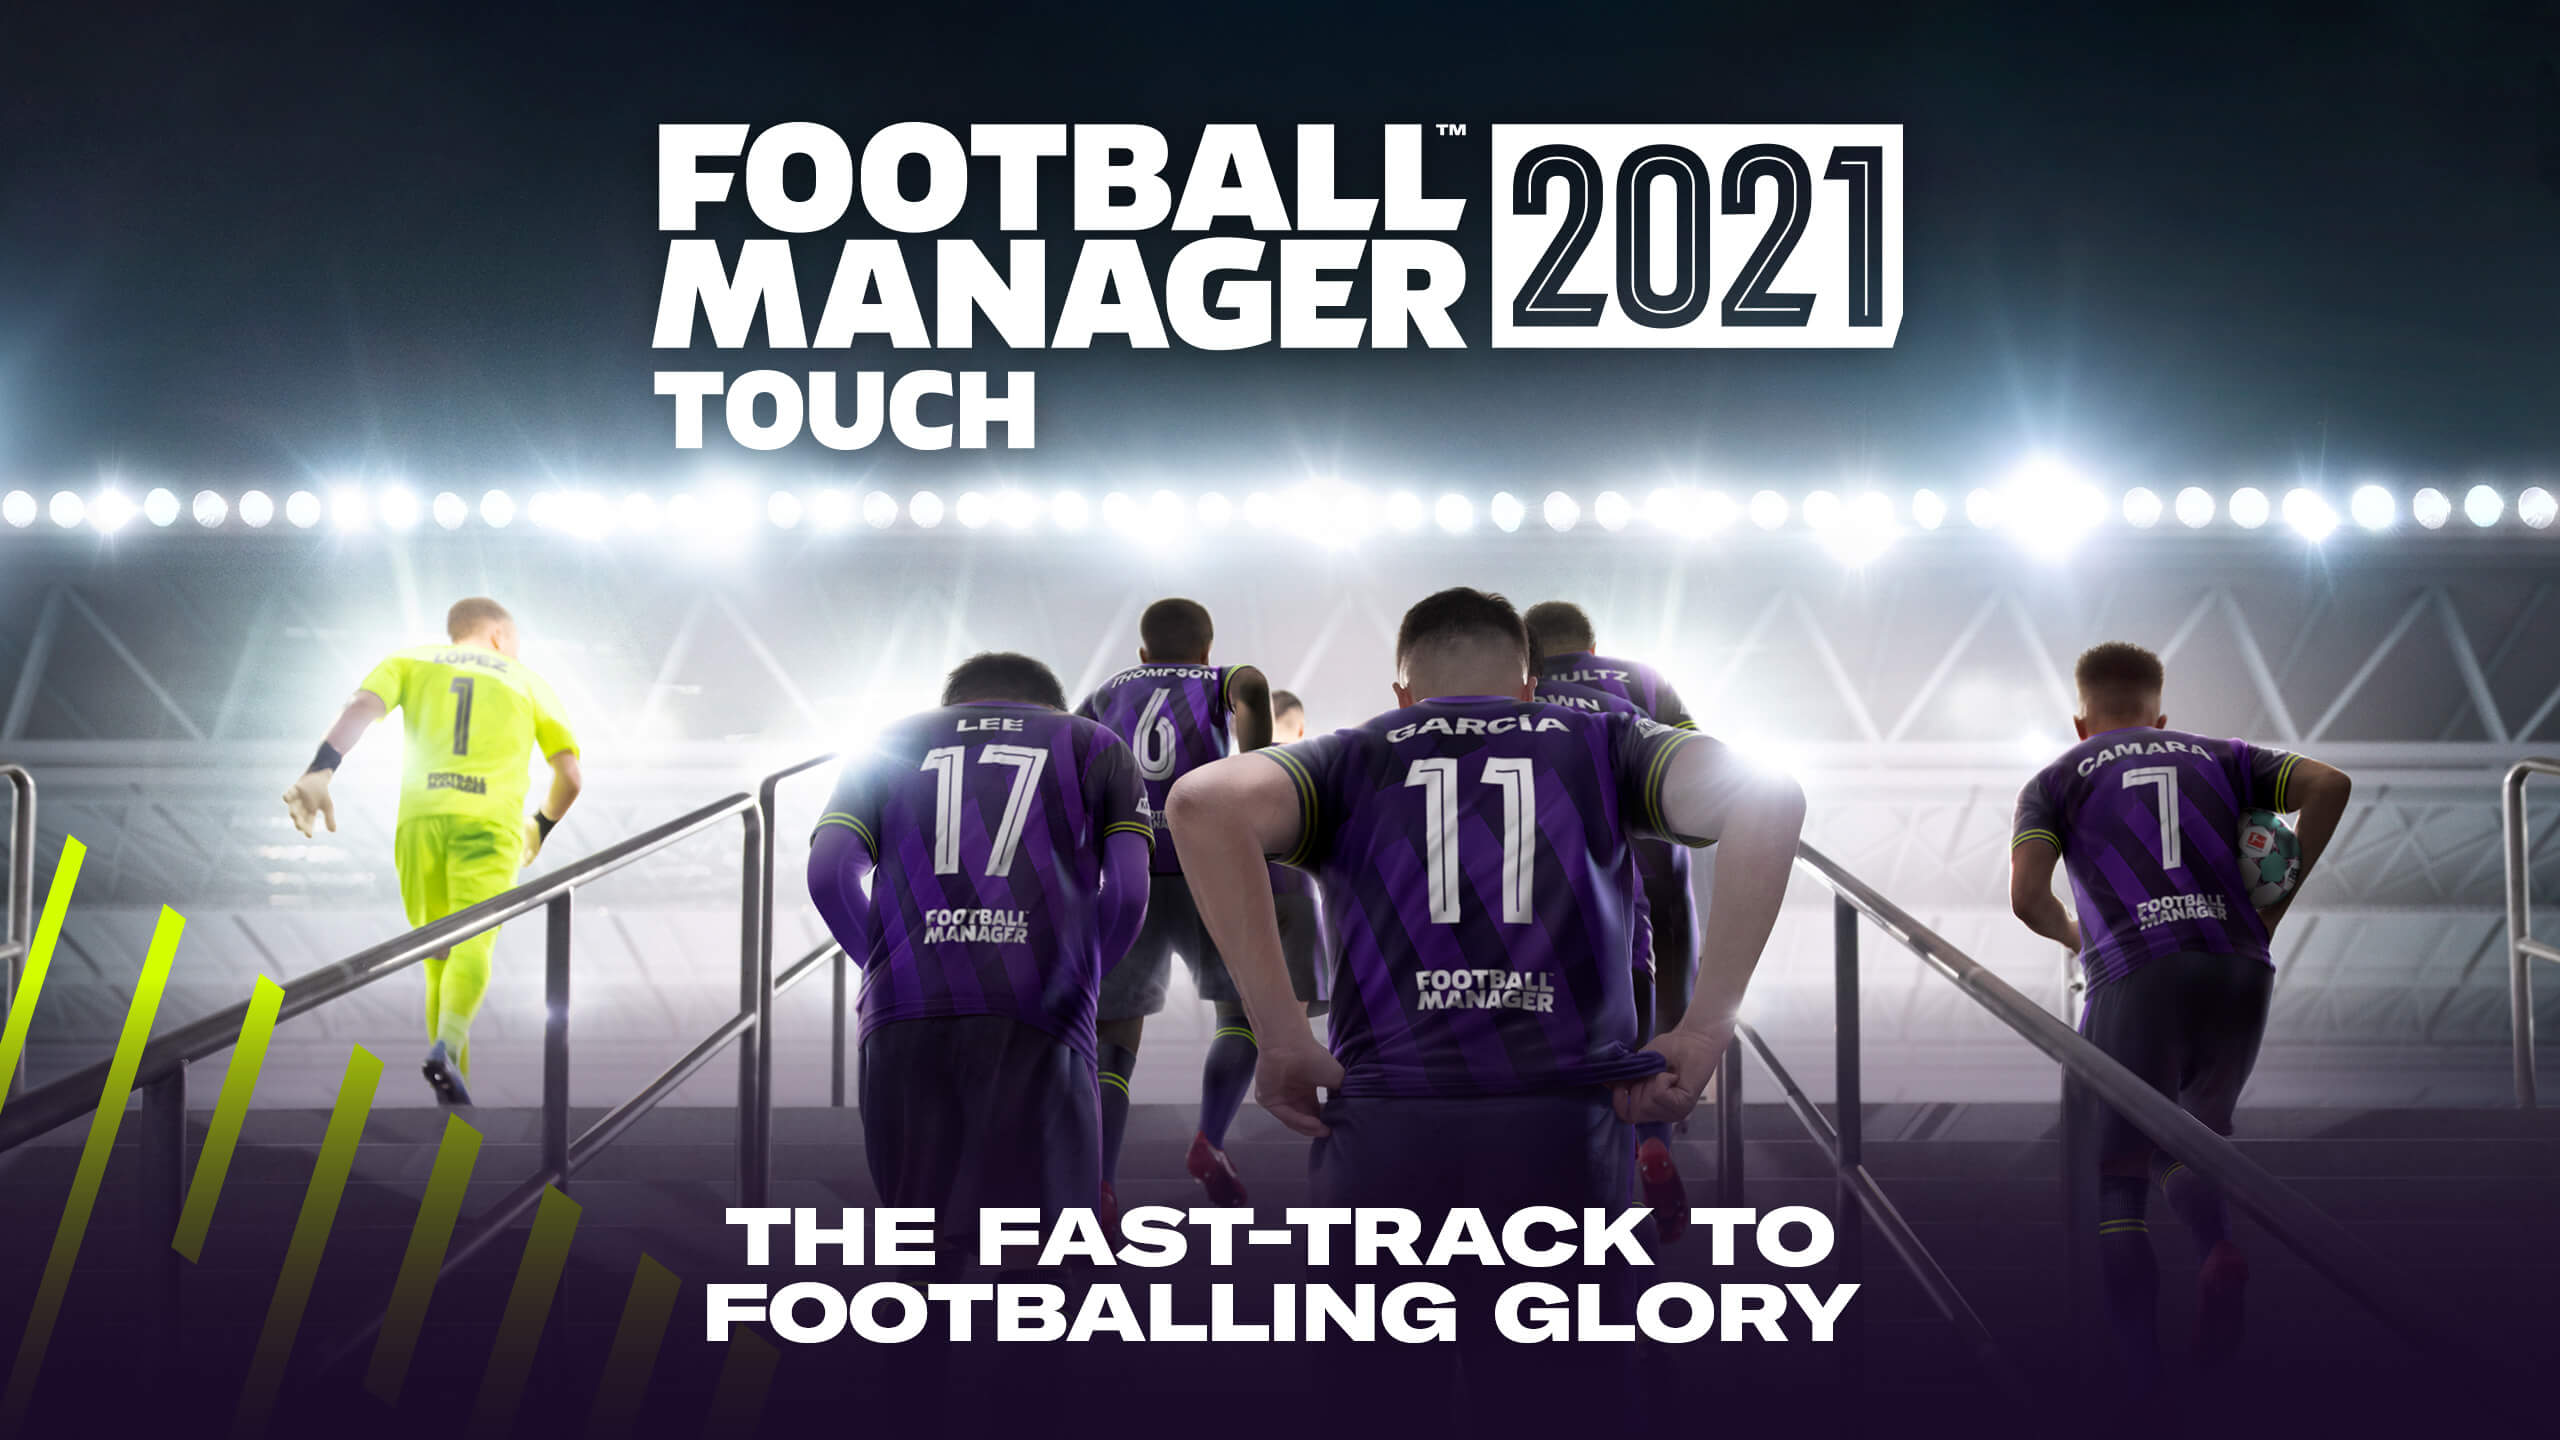 Football Manager 2021 Free Ps3 Version Free Download 2021 - time do brawl stars futebol